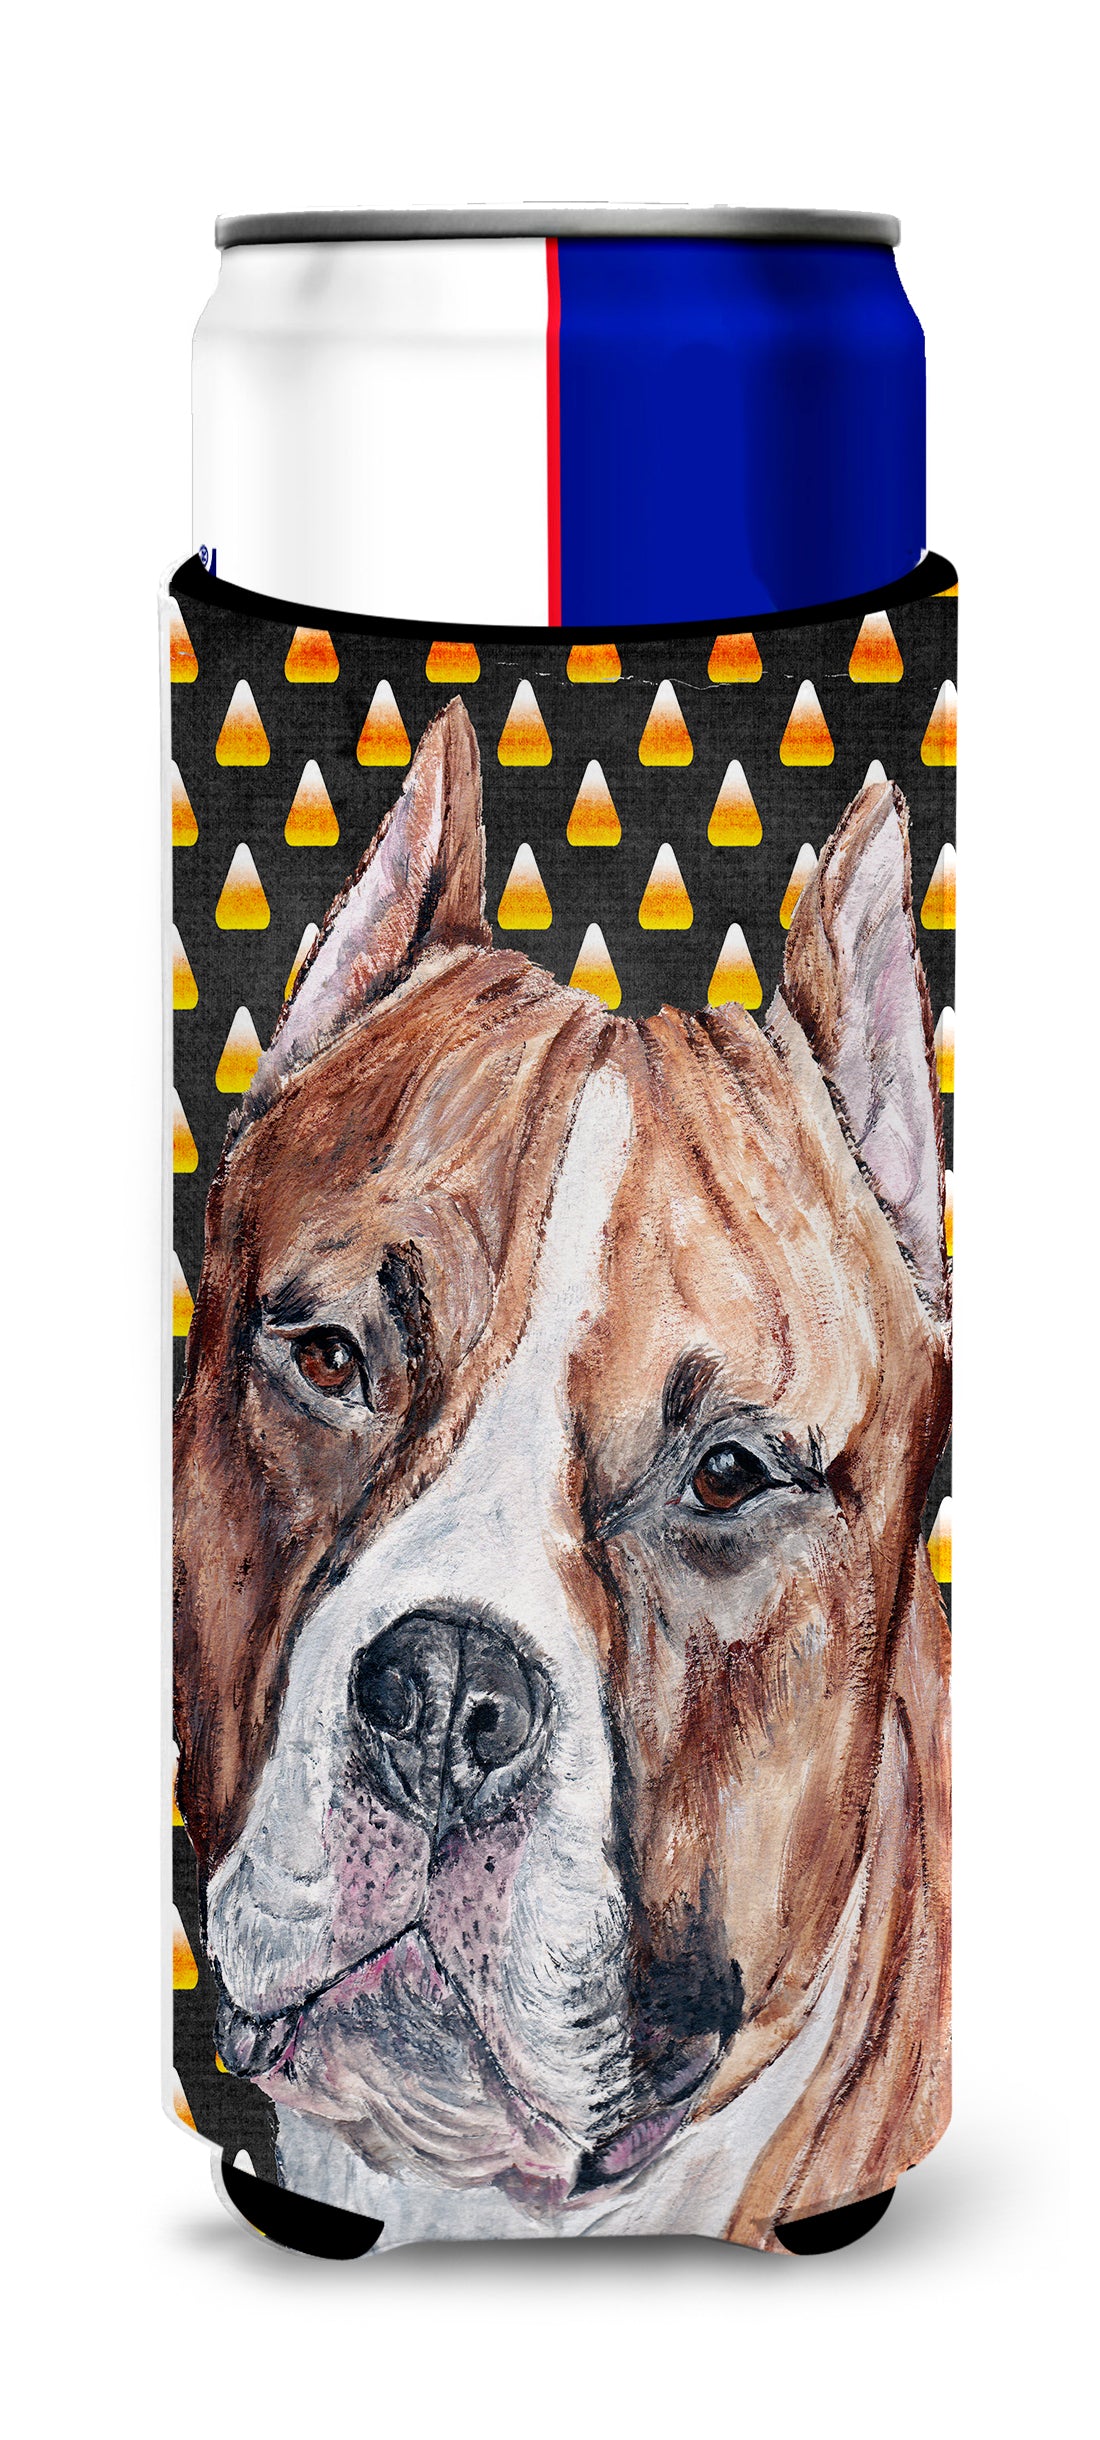 Staffordshire Bull Terrier Staffie Candy Corn Halloween Ultra Beverage Insulators for slim cans SC9656MUK